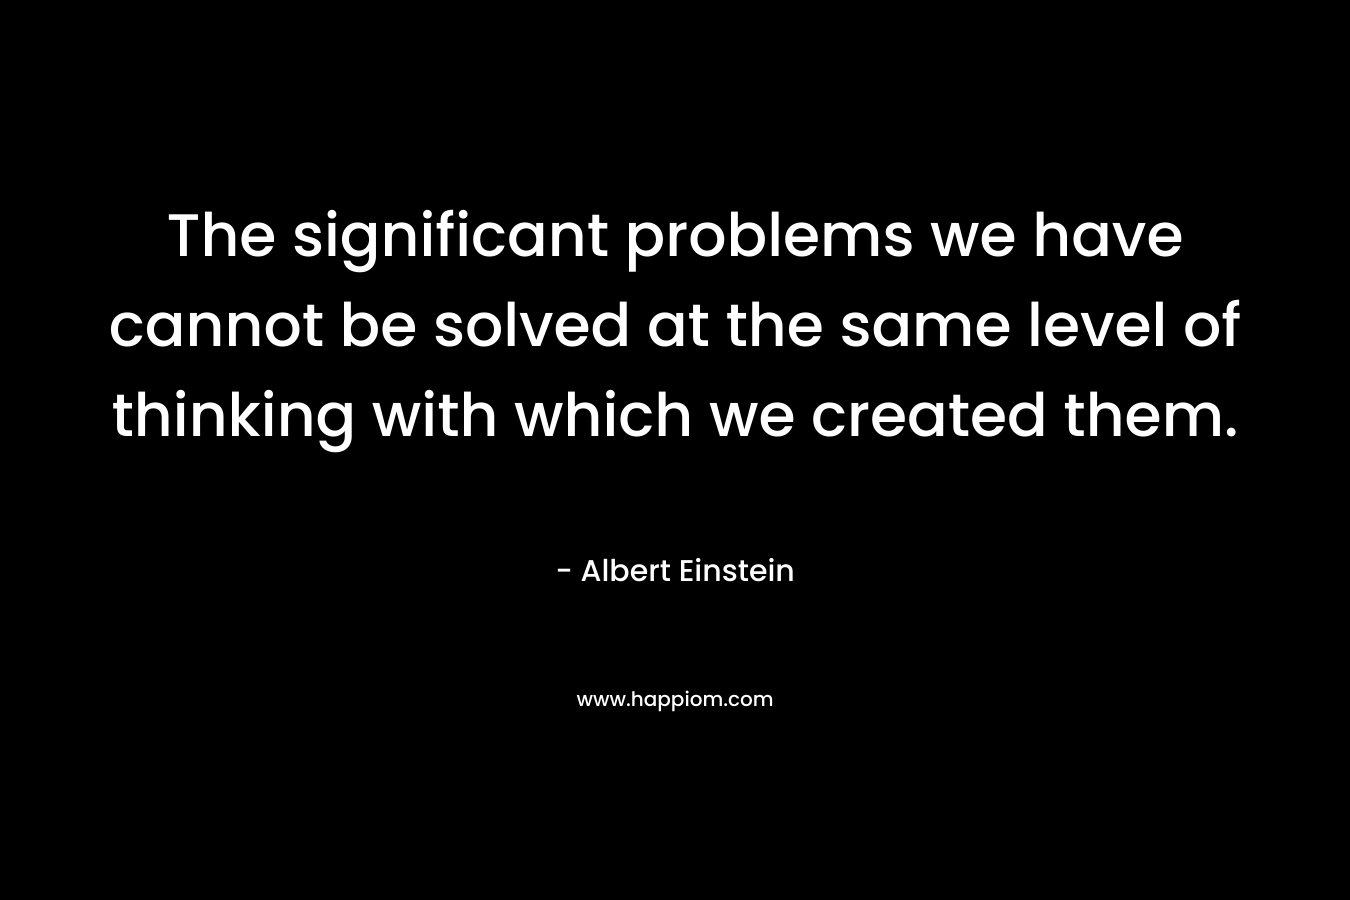 The significant problems we have cannot be solved at the same level of thinking with which we created them.